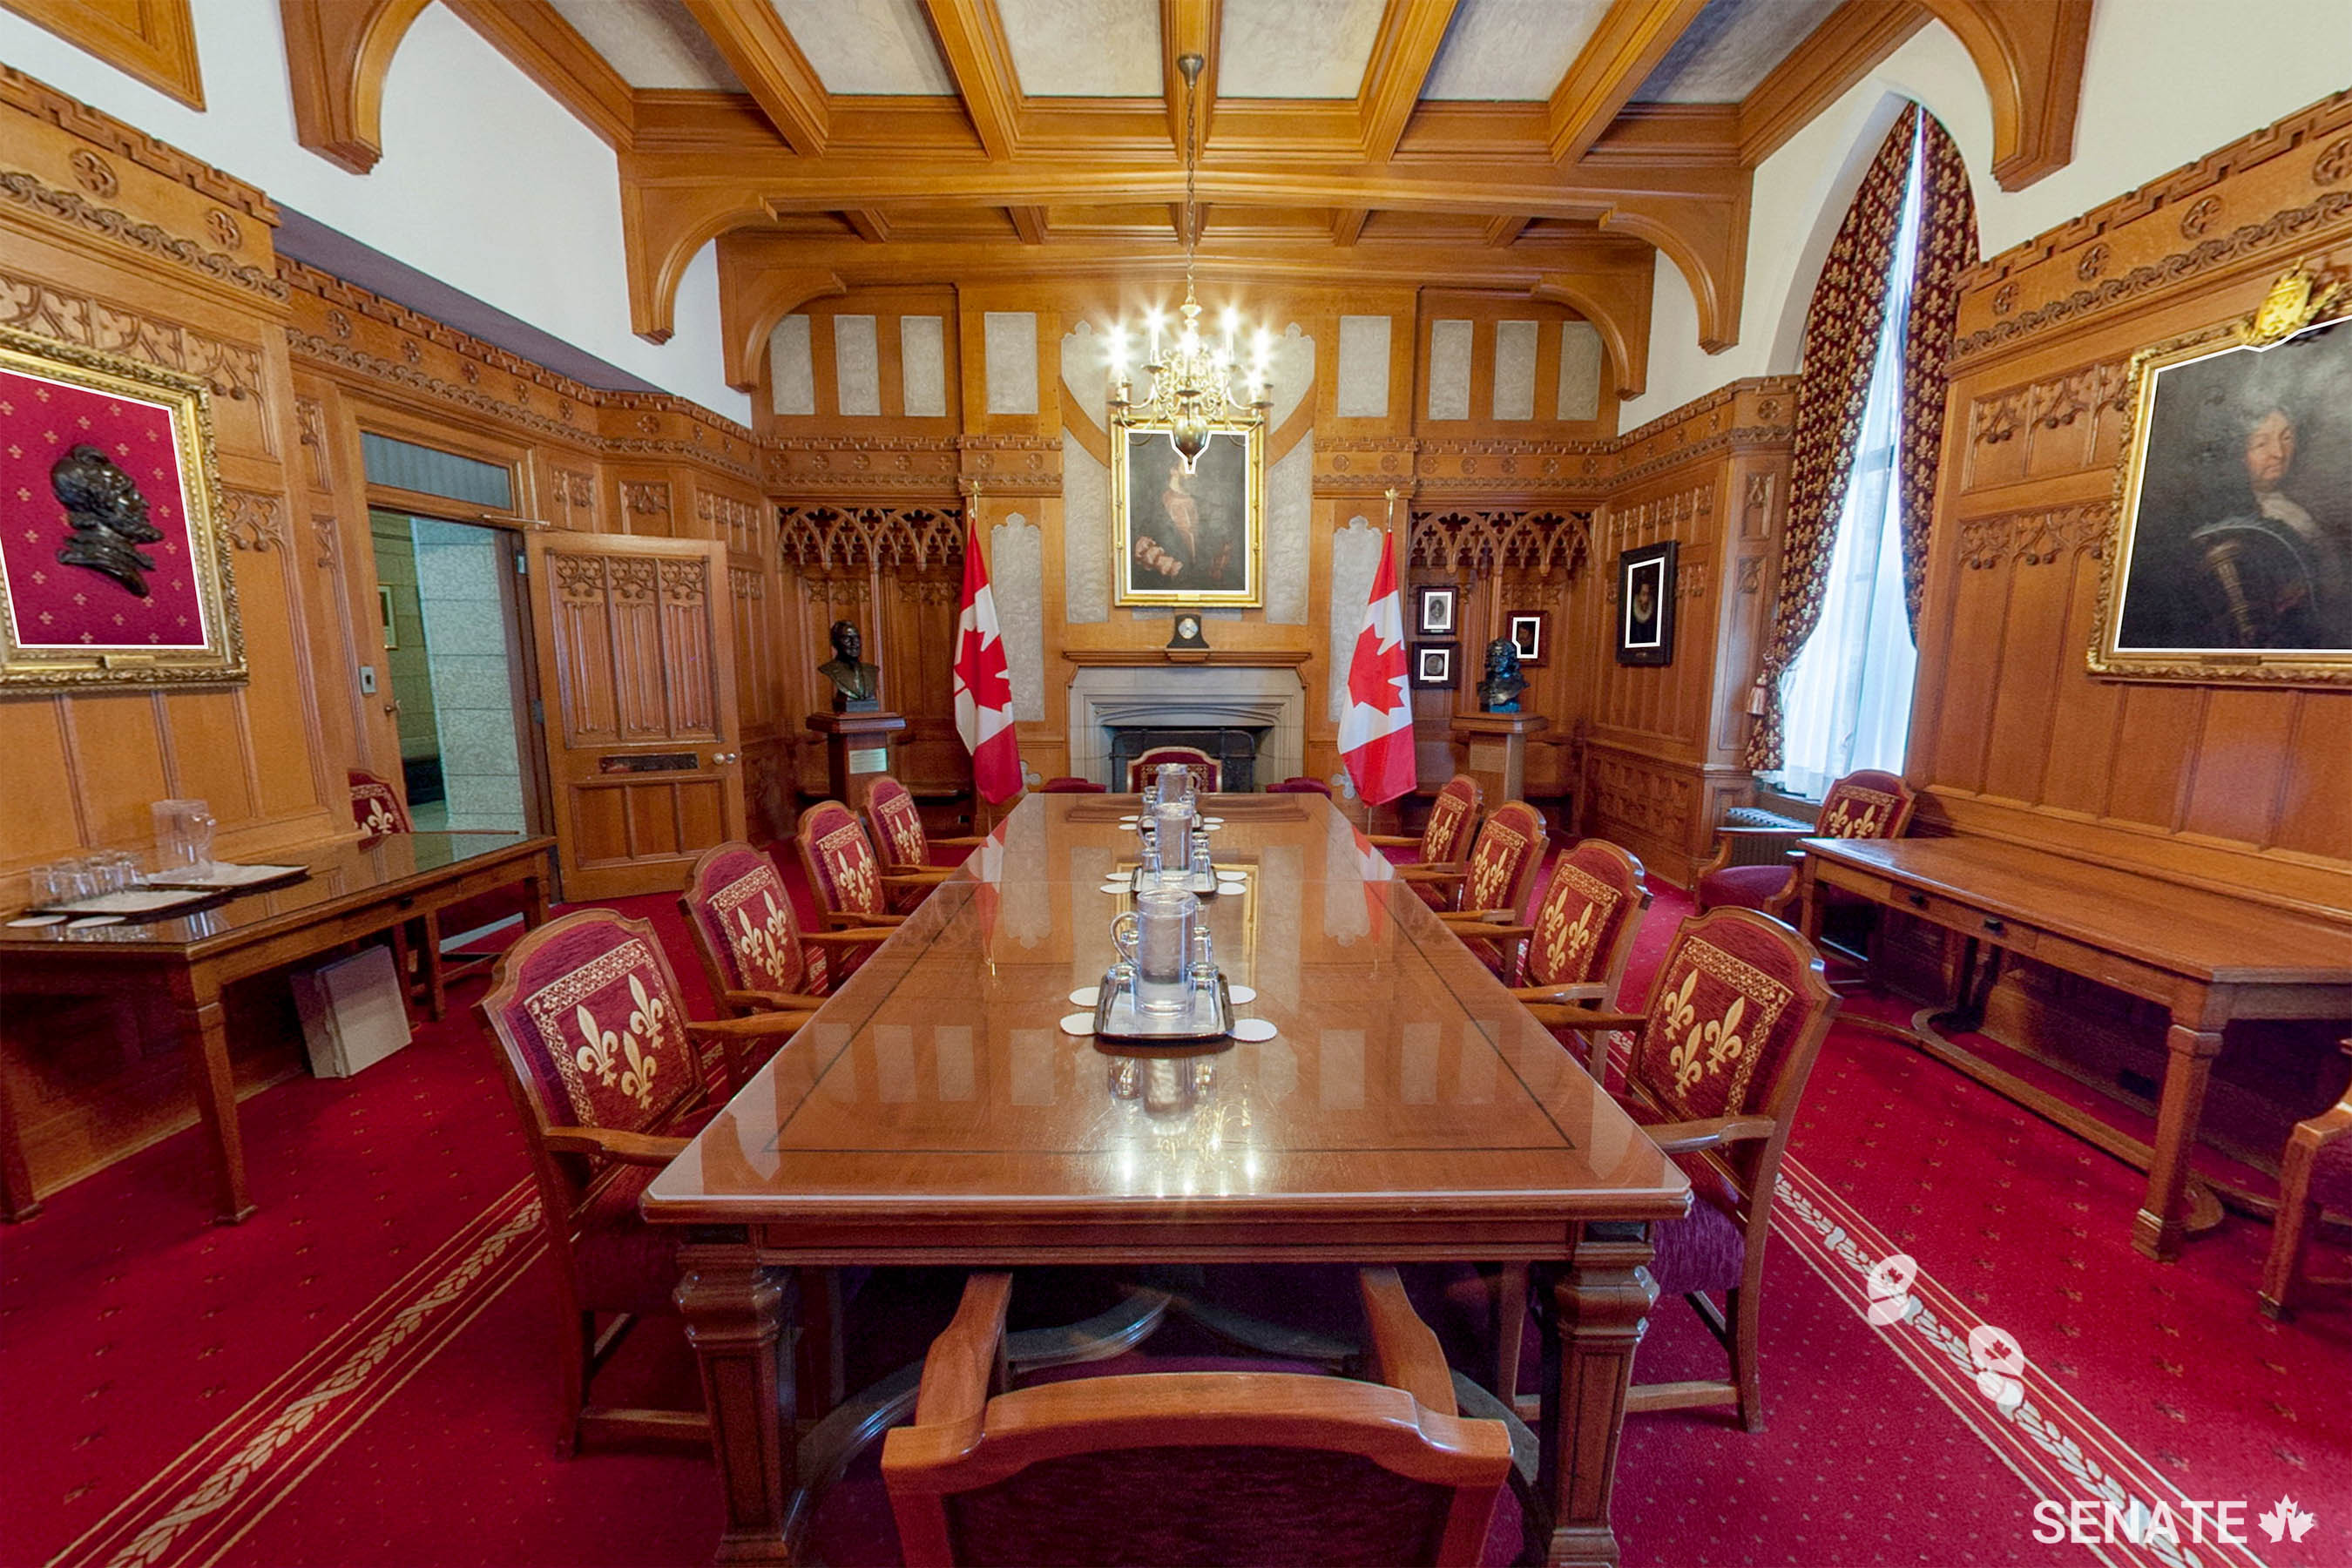 Another new area covered in the tour is the Salon de la Francophonie, a room furnished to reflect the centuries when Canada was part of New France.